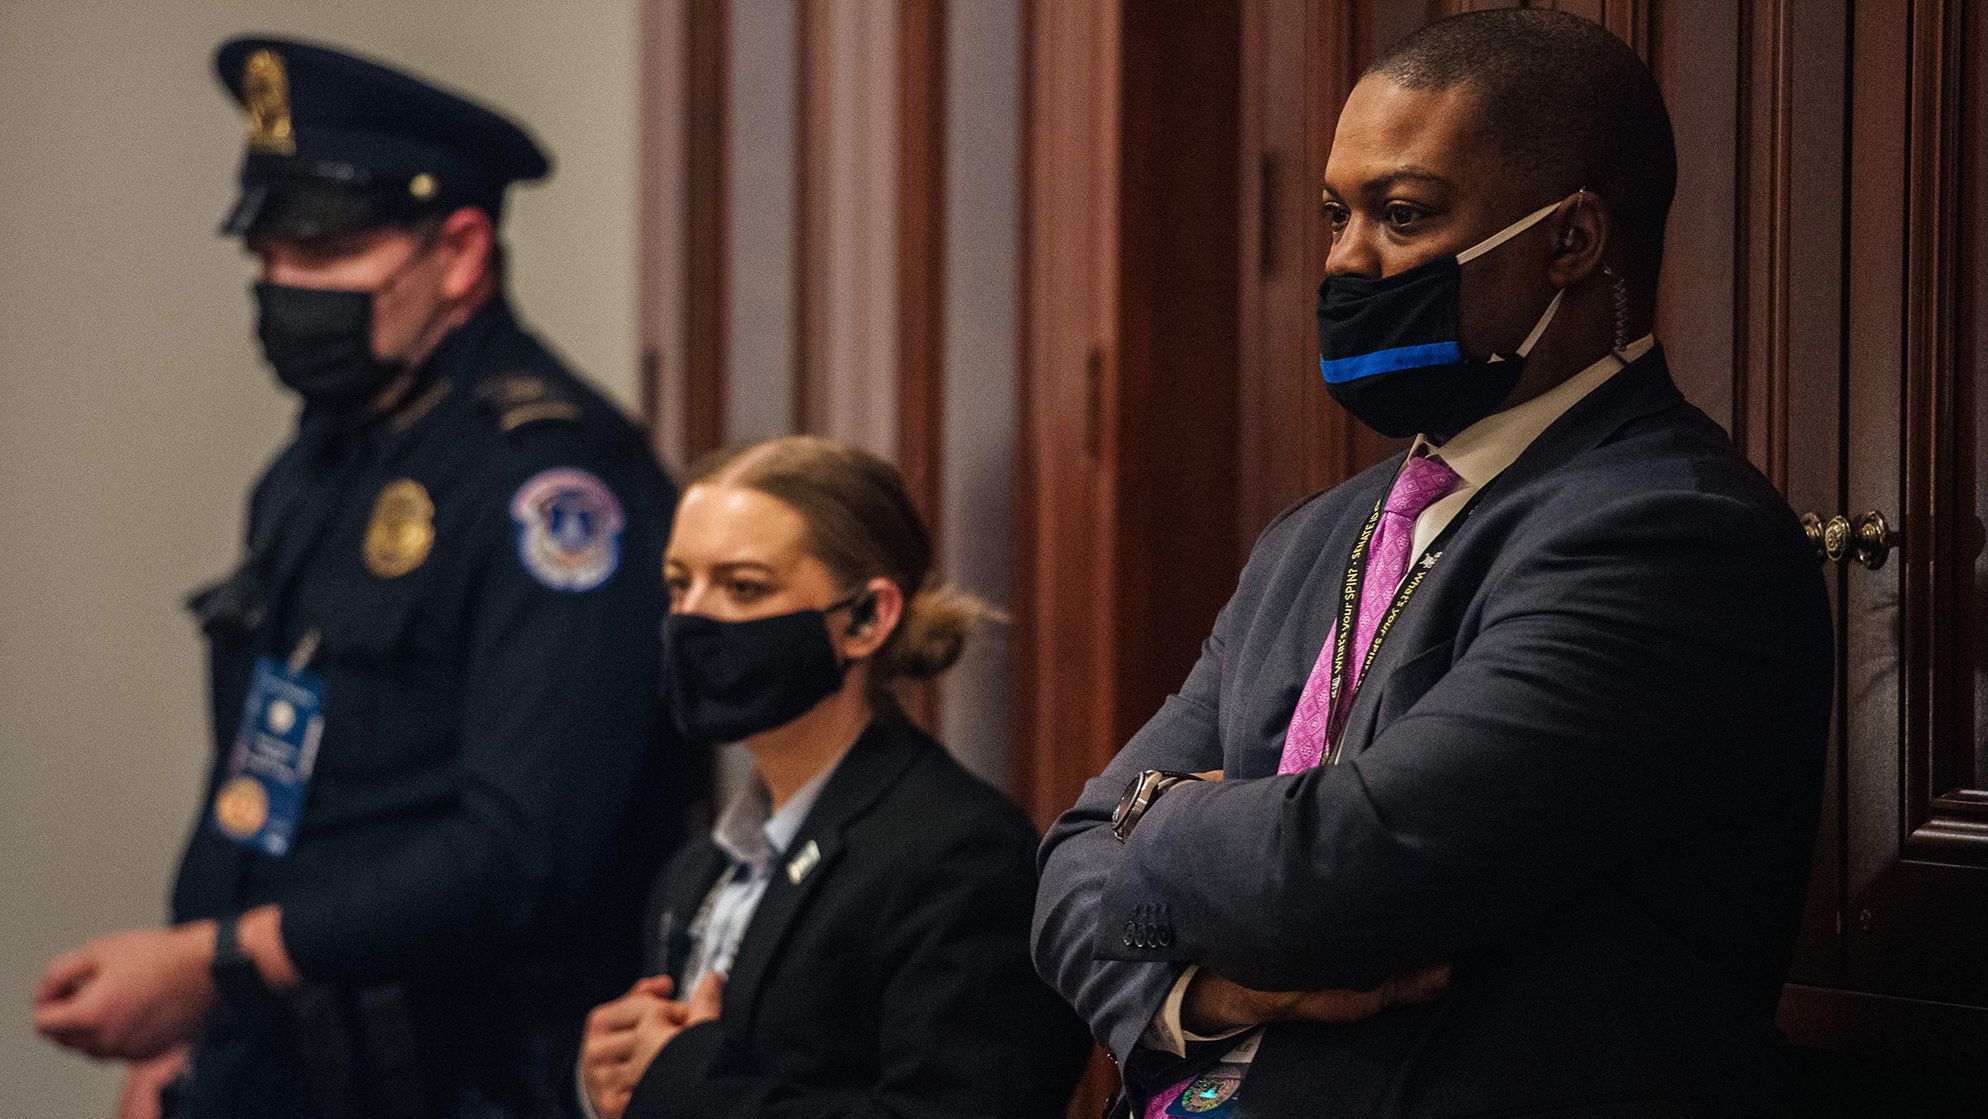 Capitol Police Officer Eugene Goodman, right, watches video footage of the Capitol riot on Wednesday. The security video, which the House impeachment managers played for the first time Wednesday, shows Goodman <a href="https://www.cnn.com/2021/02/10/politics/eugene-goodman-us-capitol-riot/index.html" target="_blank">potentially saving Sen. Mitt Romney</a> from the violent mob.